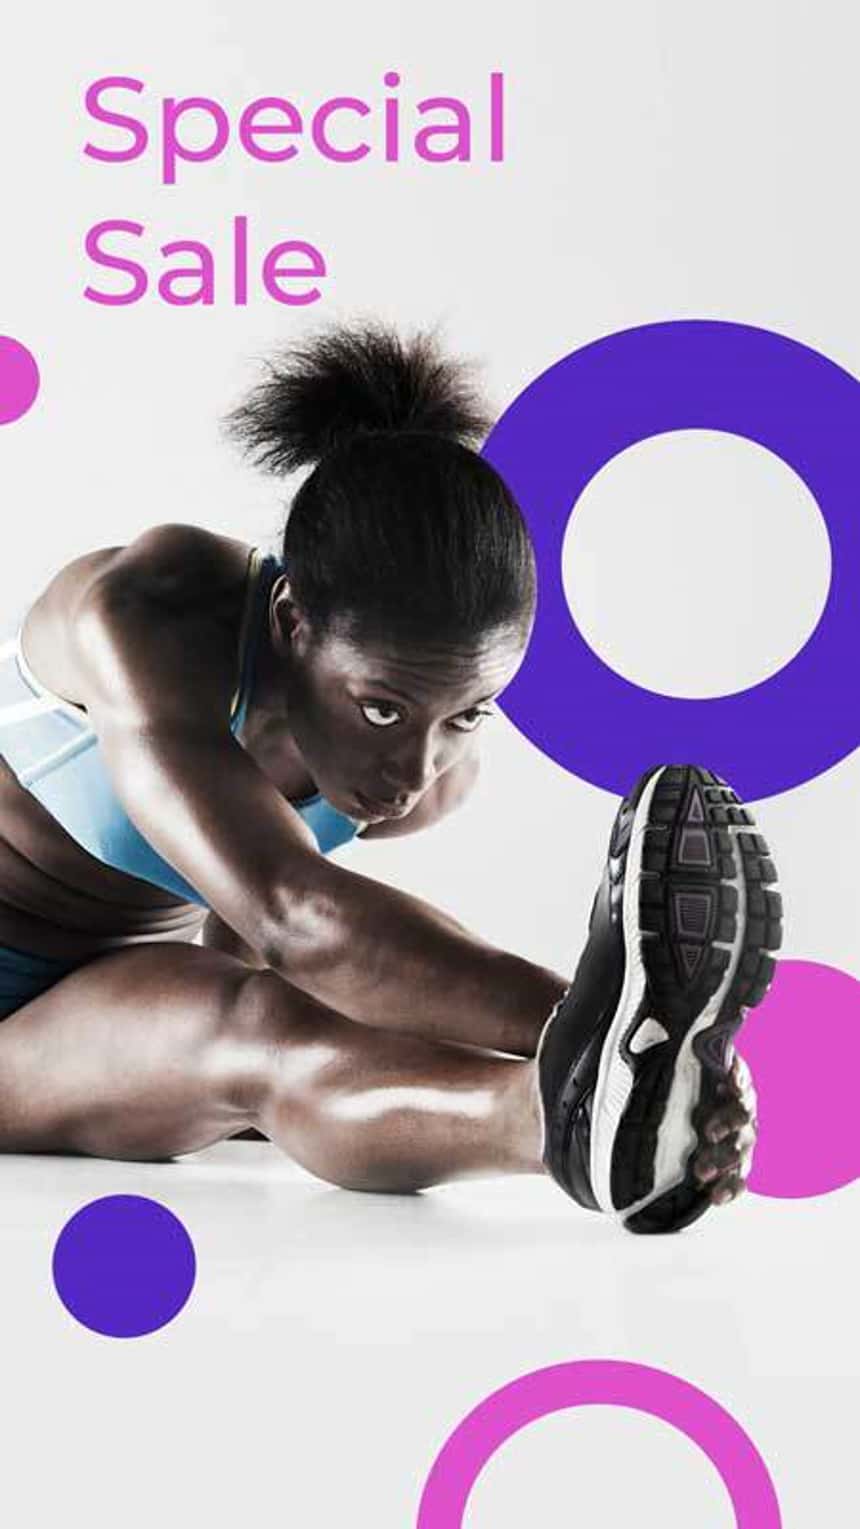 Promo video advertising a sale featuring image of a woman stretching in athletic gear. Text on the image reads 